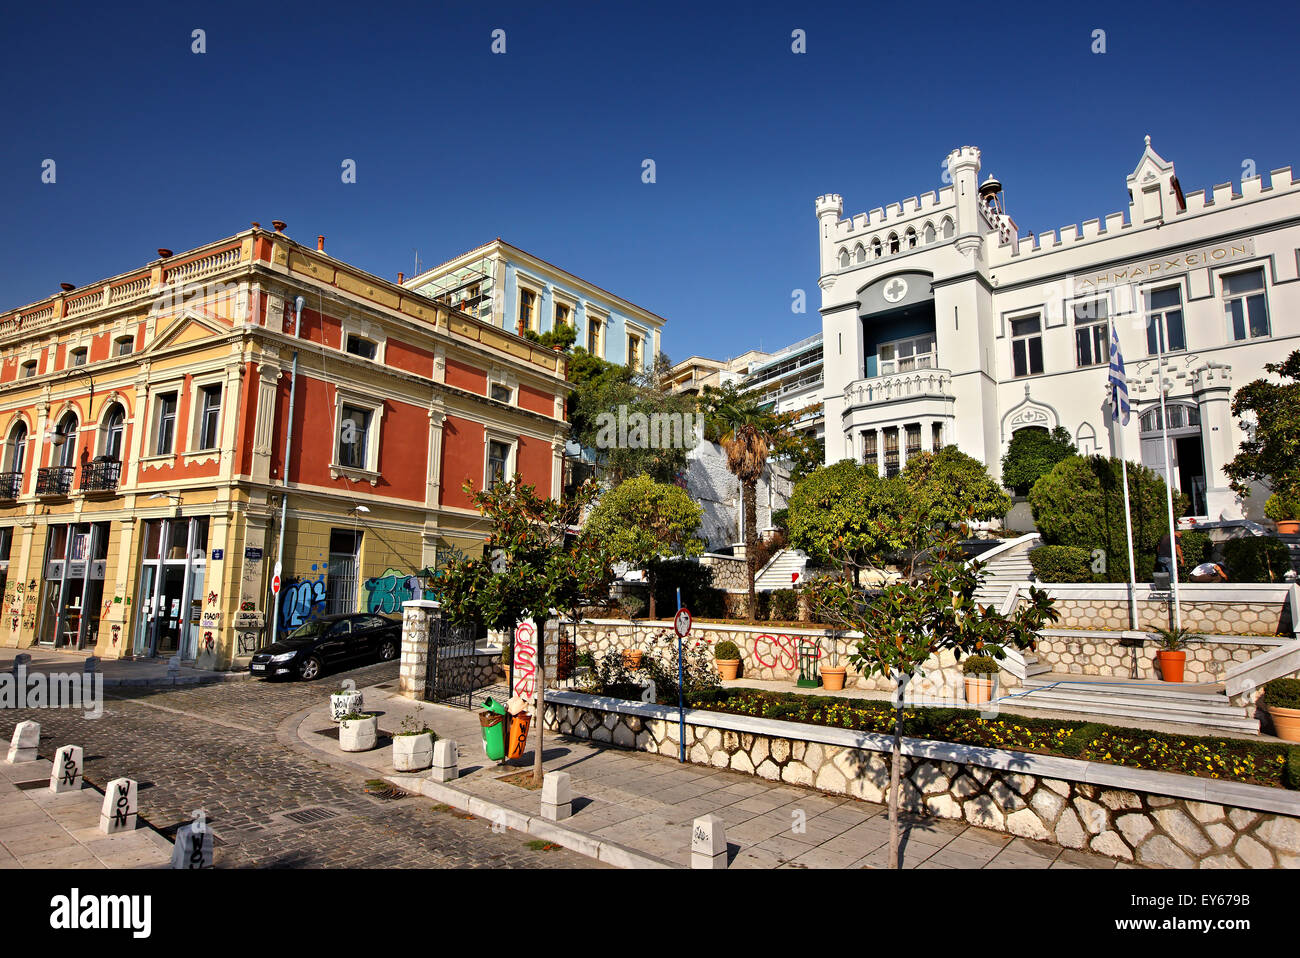 A 'complex' of beautiful, colorful neoclassical buildings in Kavala town, Macedonia, Greece. To the right, the Town Hall. Stock Photo